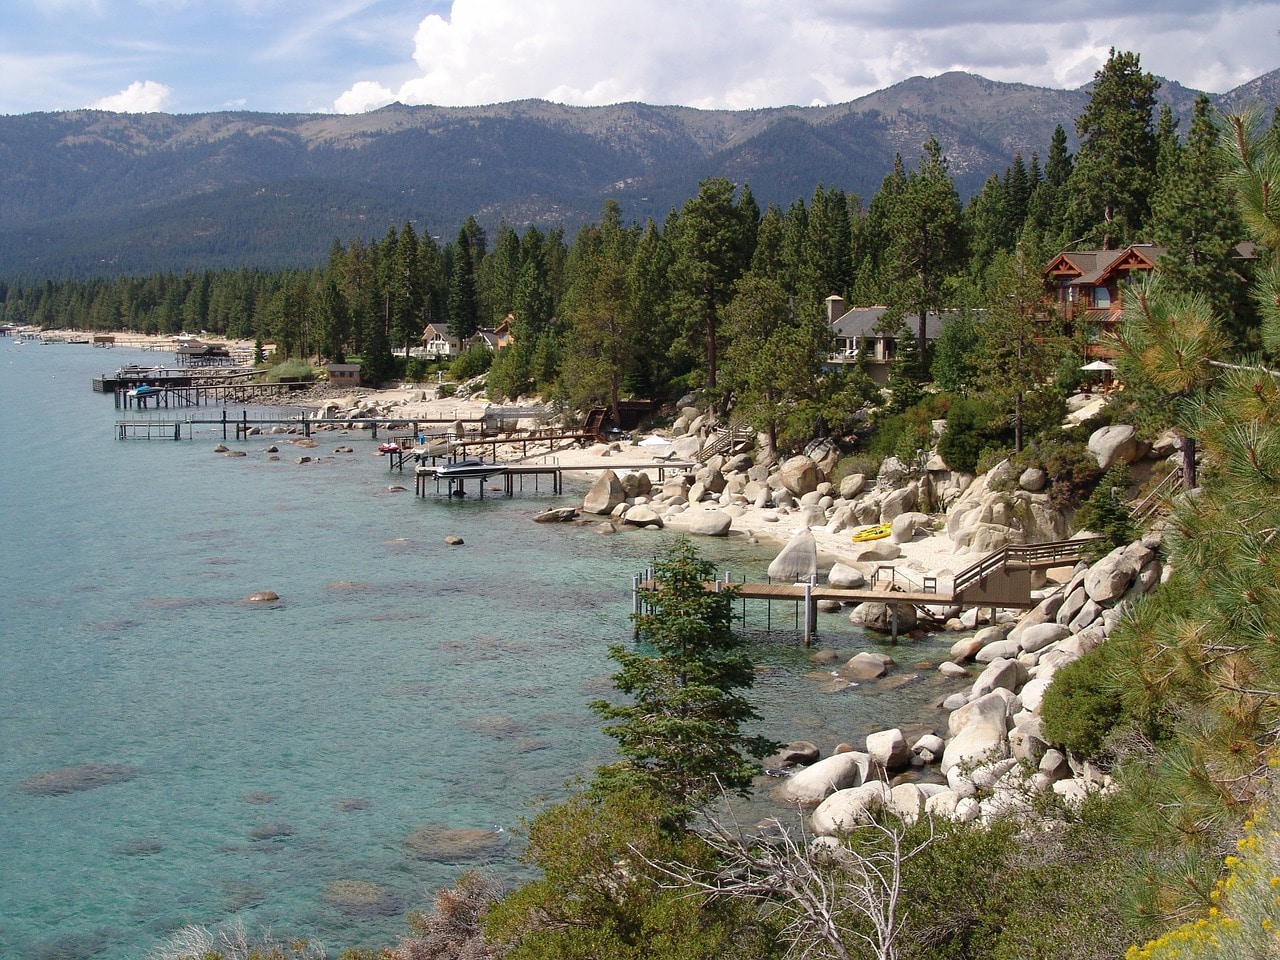 The shore of Lake Tahoe, seen from our Lake Tahoe Guide